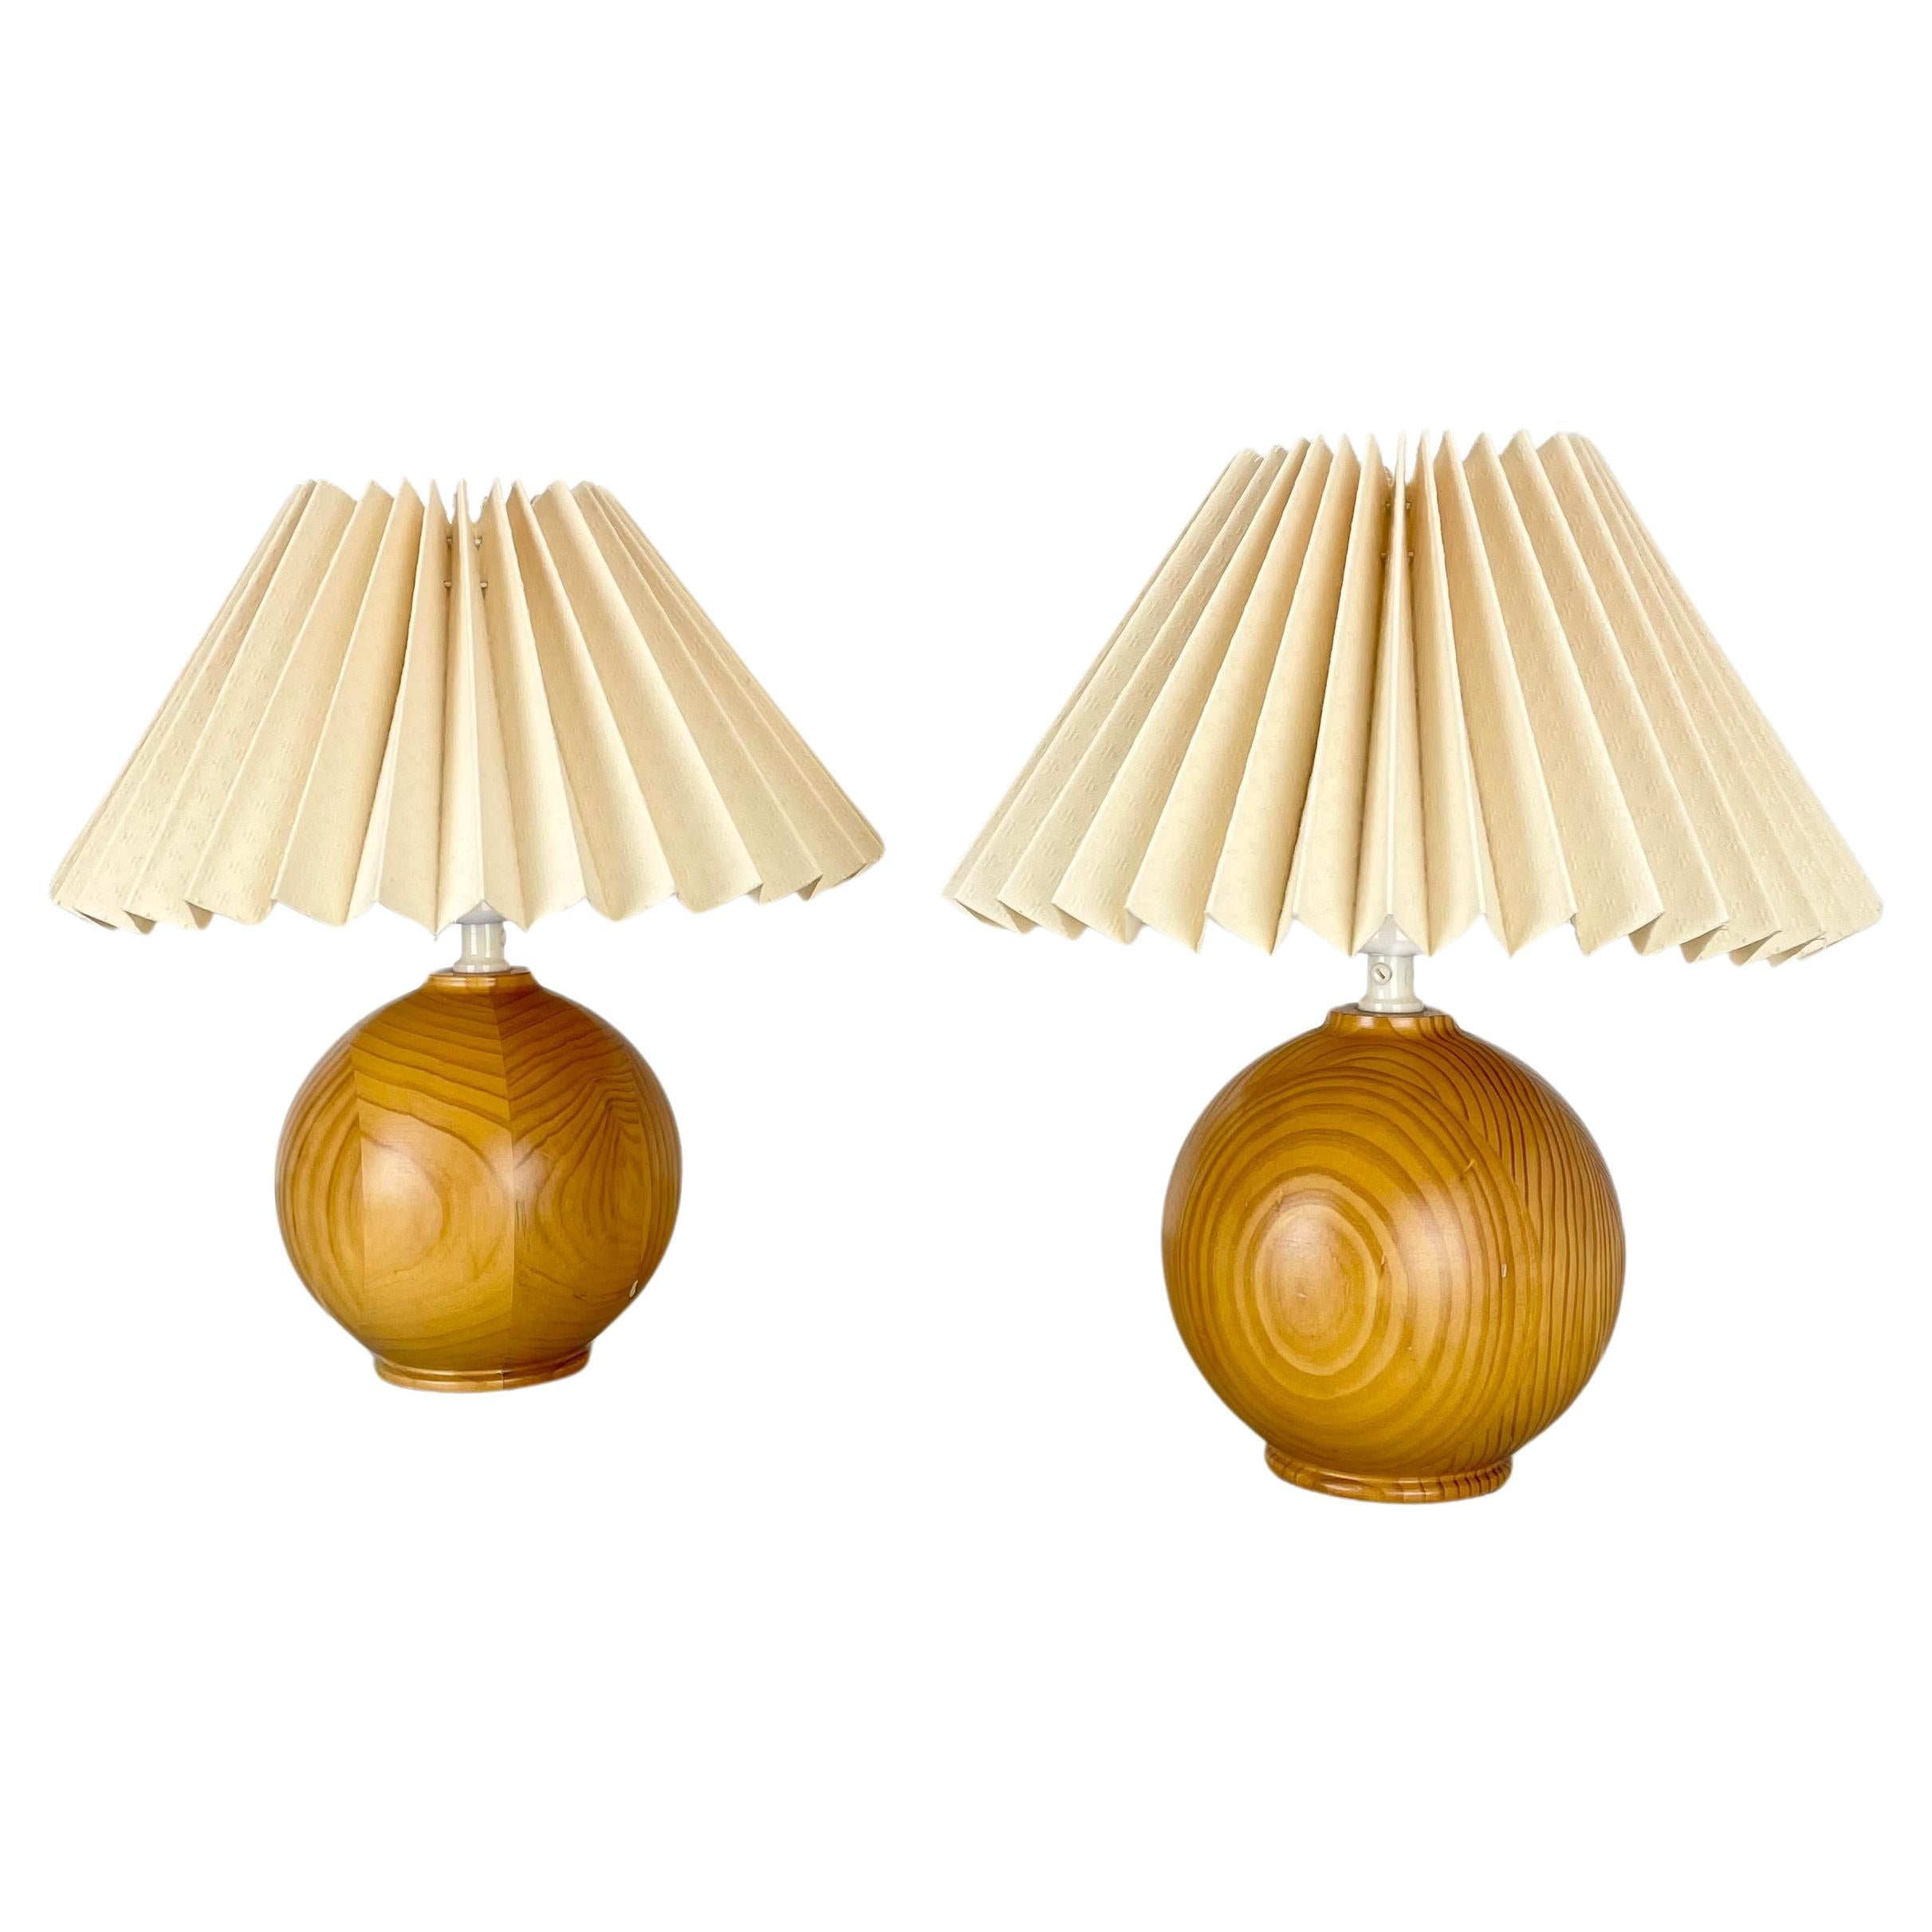 set of 2 Pierre CHAPO Style solid pine wood ball form table lights, Sweden 1970s For Sale